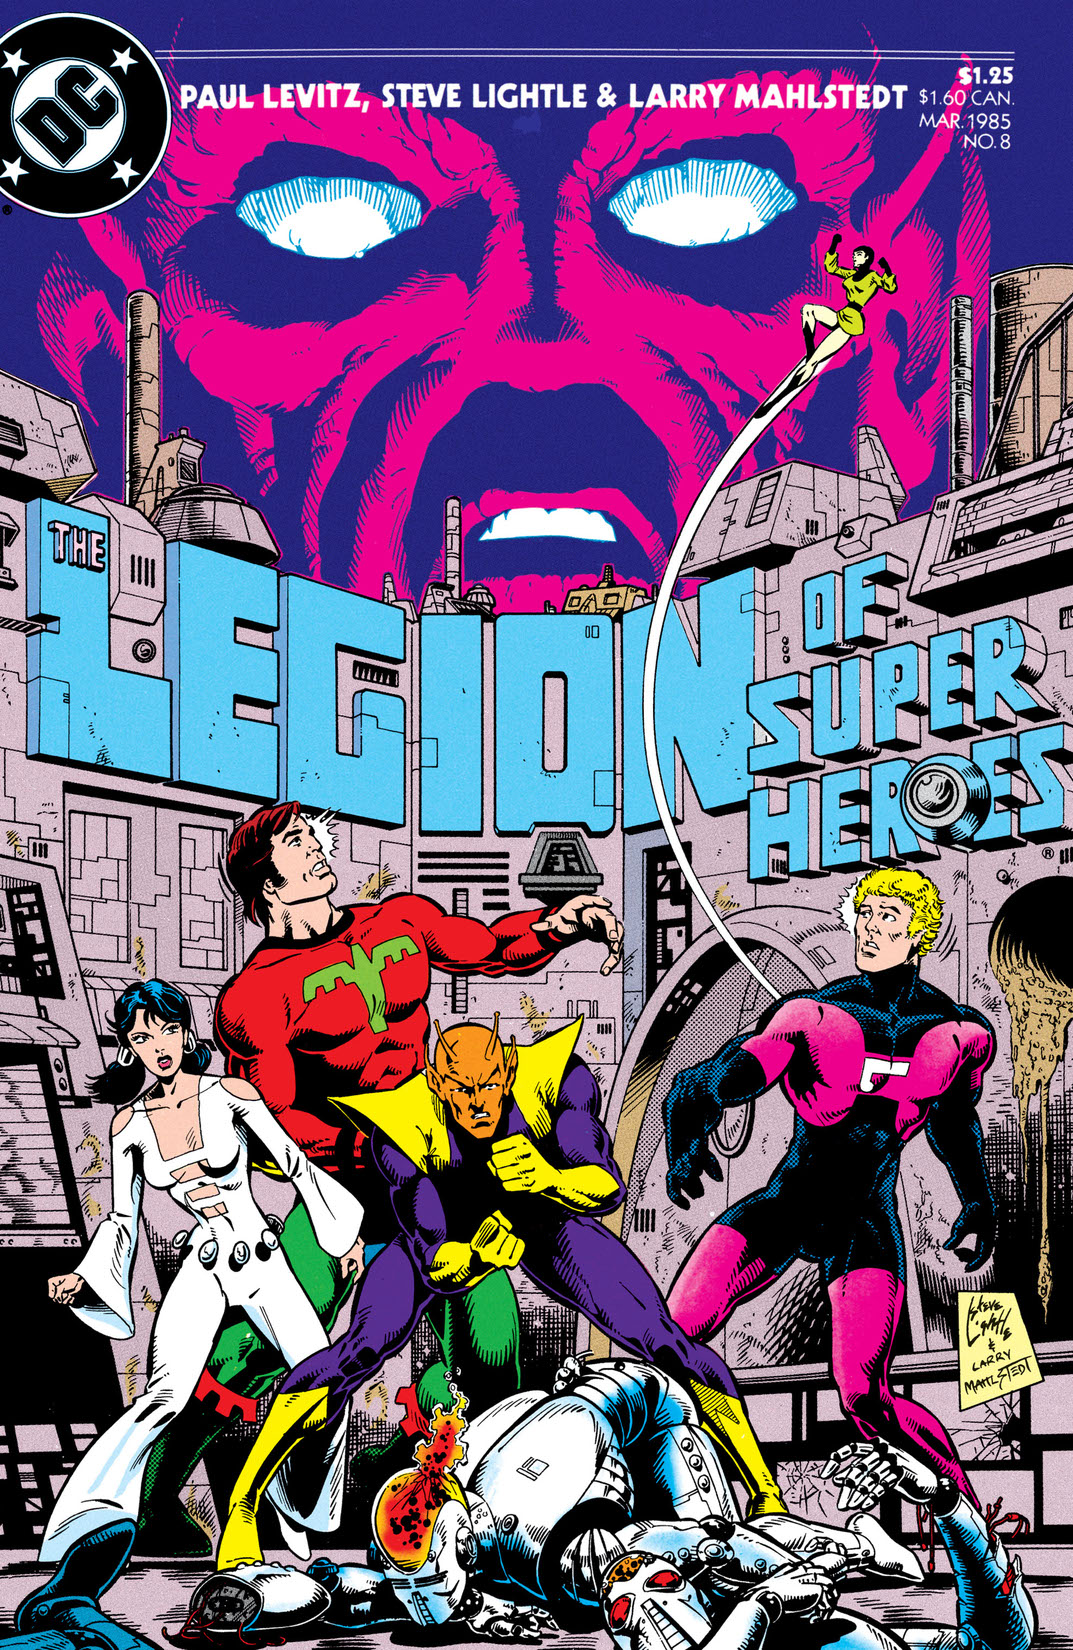 Legion of Super-Heroes (1984-) #8 preview images